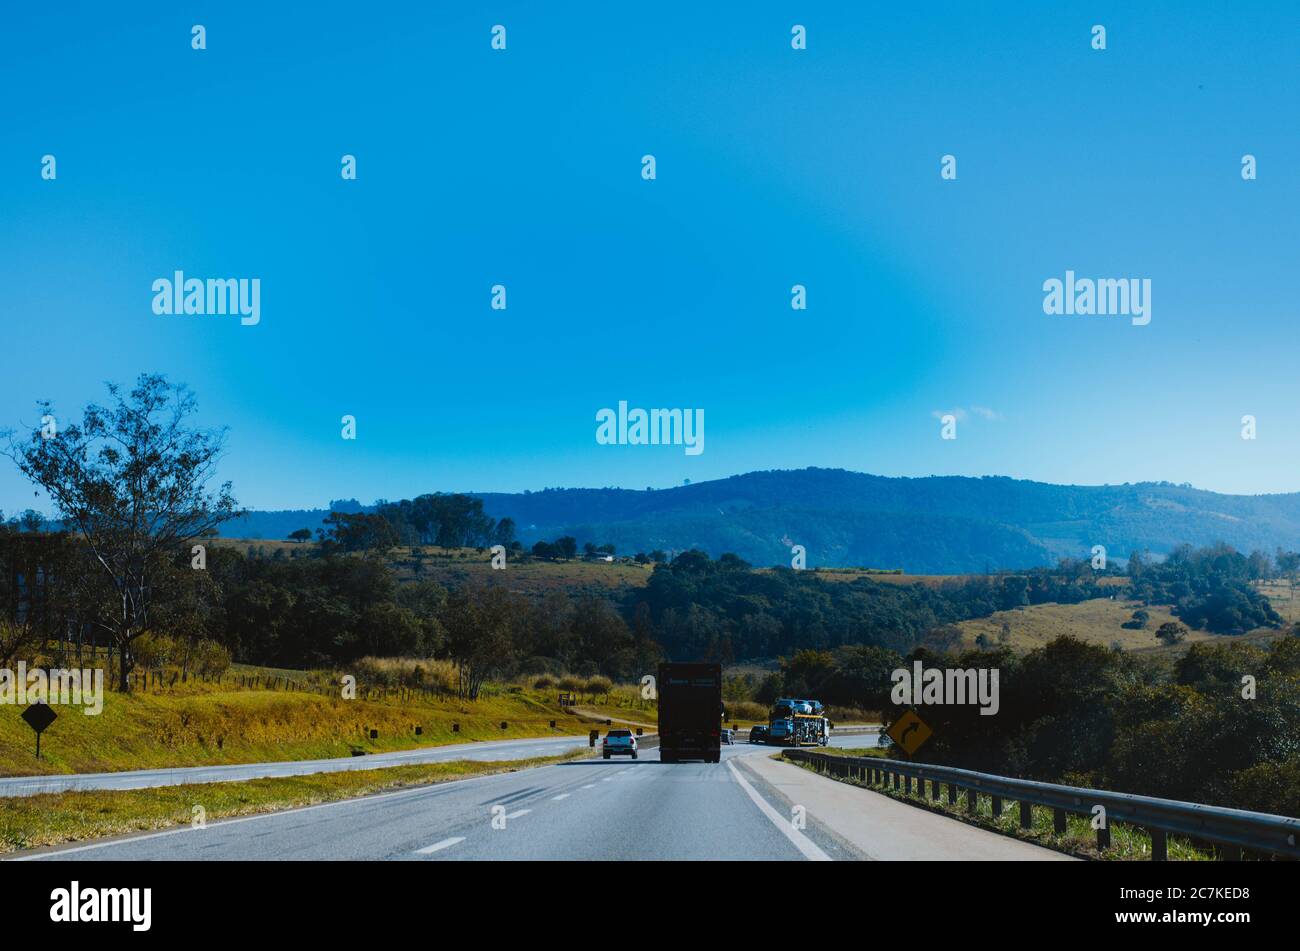 Dramatic view of Minas Gerais BR-381 highway surrounded by greenery and some vehicles in a distance in a clean sky in the afternoon. Stock Photo